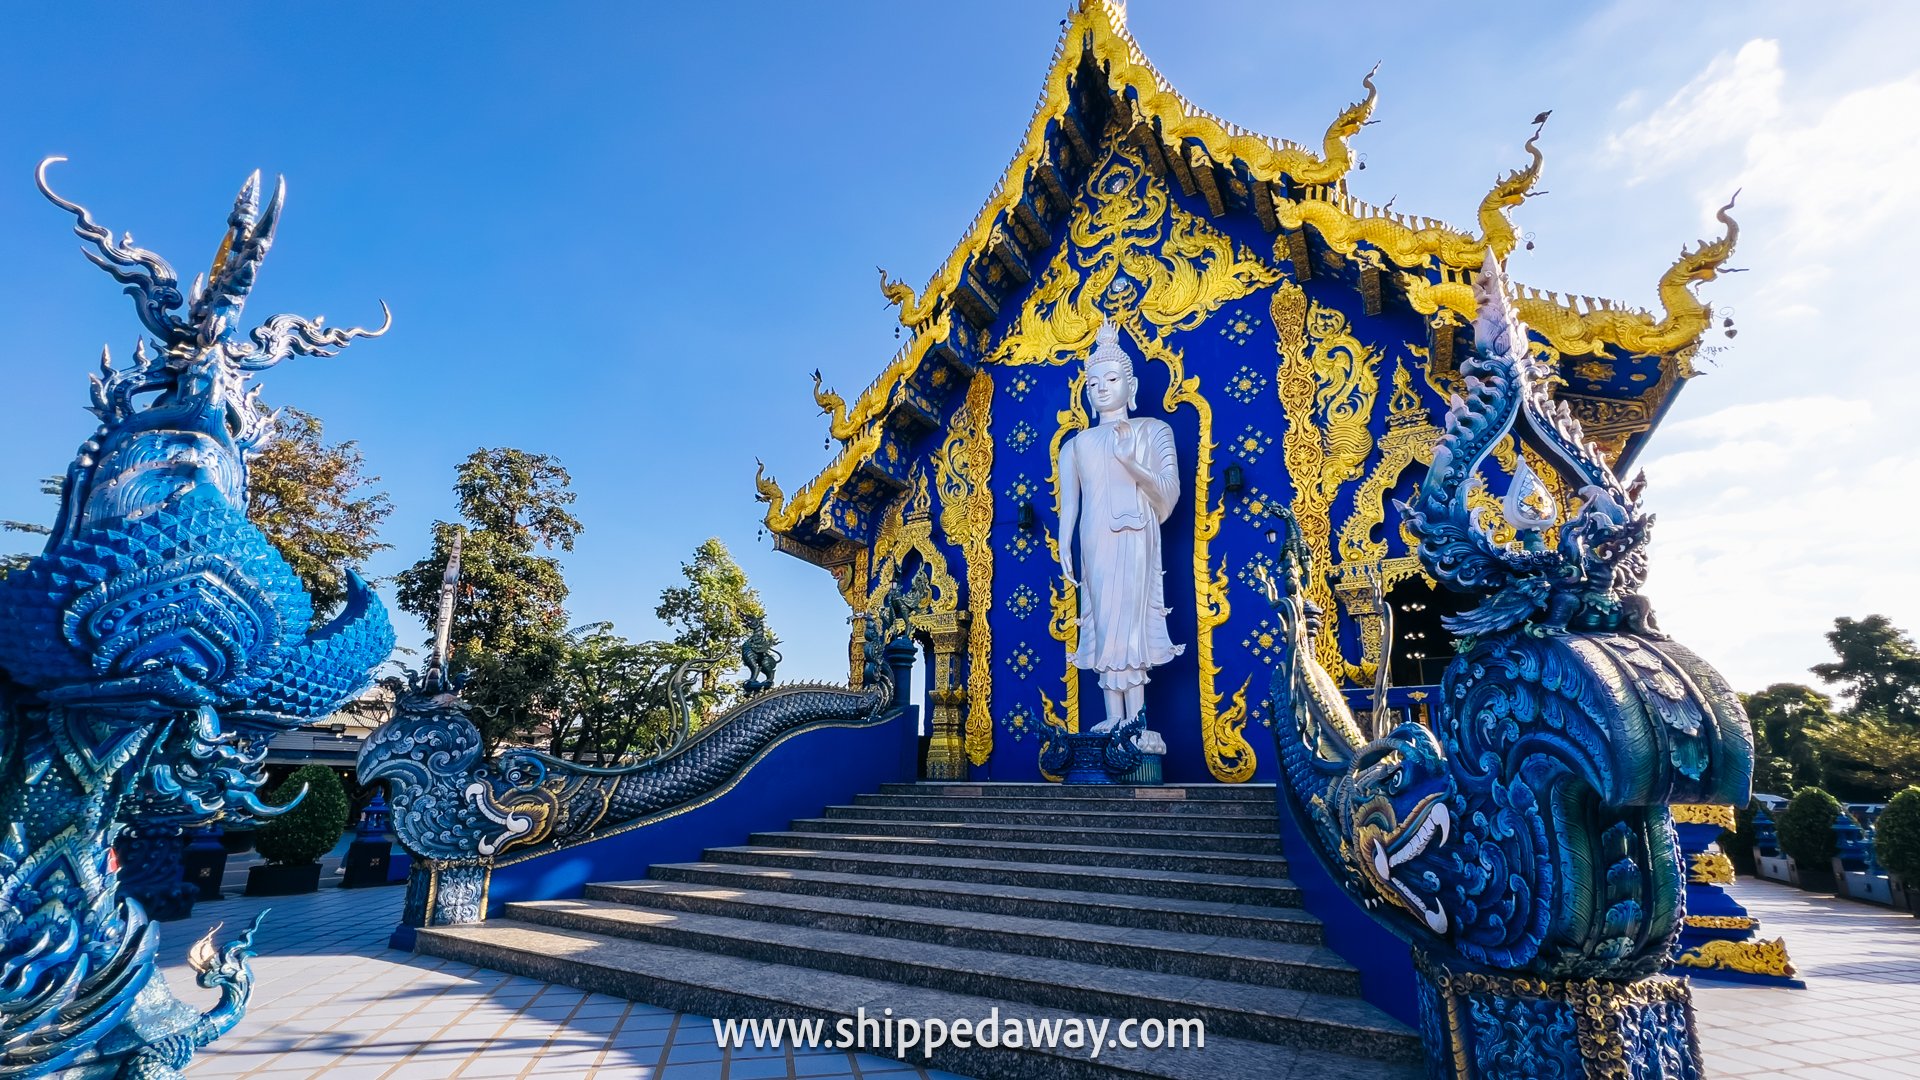 white temple nearby attractions, what to visit after white temple, getting to blue temple from white temple, blue temple chiang rai